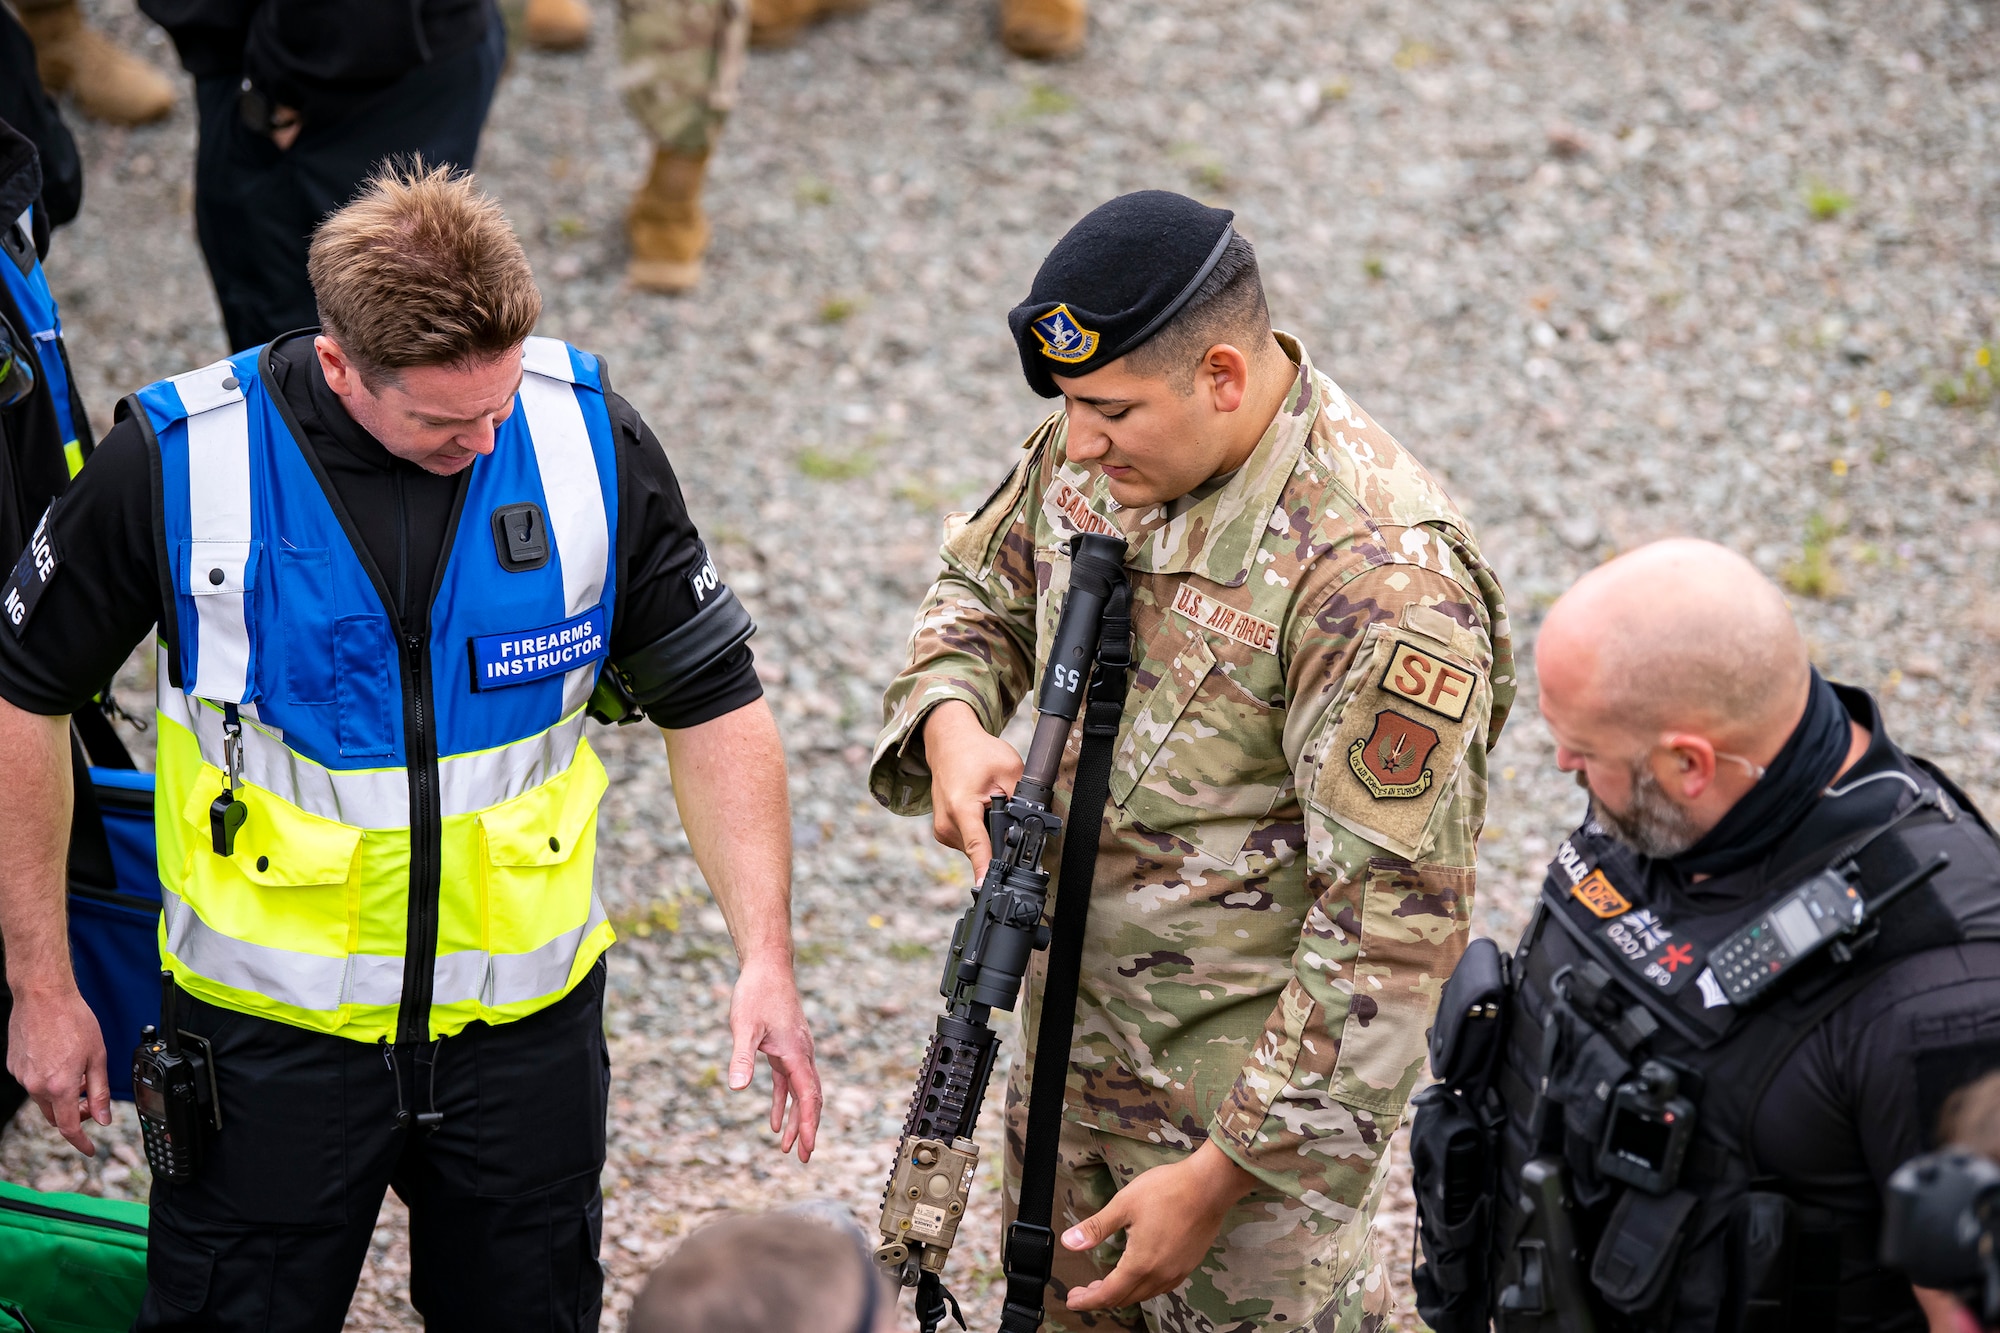 Staff Sgt. Carlos Sandoval, center, 422nd Security Forces Squadron unit trainer, demonstrates an M4 carbine to police officers from Northamptonshire Police Department and Ministry of Defense prior to a tri-agency active shooter response exercise at RAF Croughton, England, June 30, 2021. Airmen from the 422nd SFS along with police officers from the NHPD and MOD, participated in multiple exercises to enhance their search and seizure tactics, strengthen local ties and gain rapport with their fellow officers. (U.S. Air Force photo by Senior Airman Eugene Oliver)